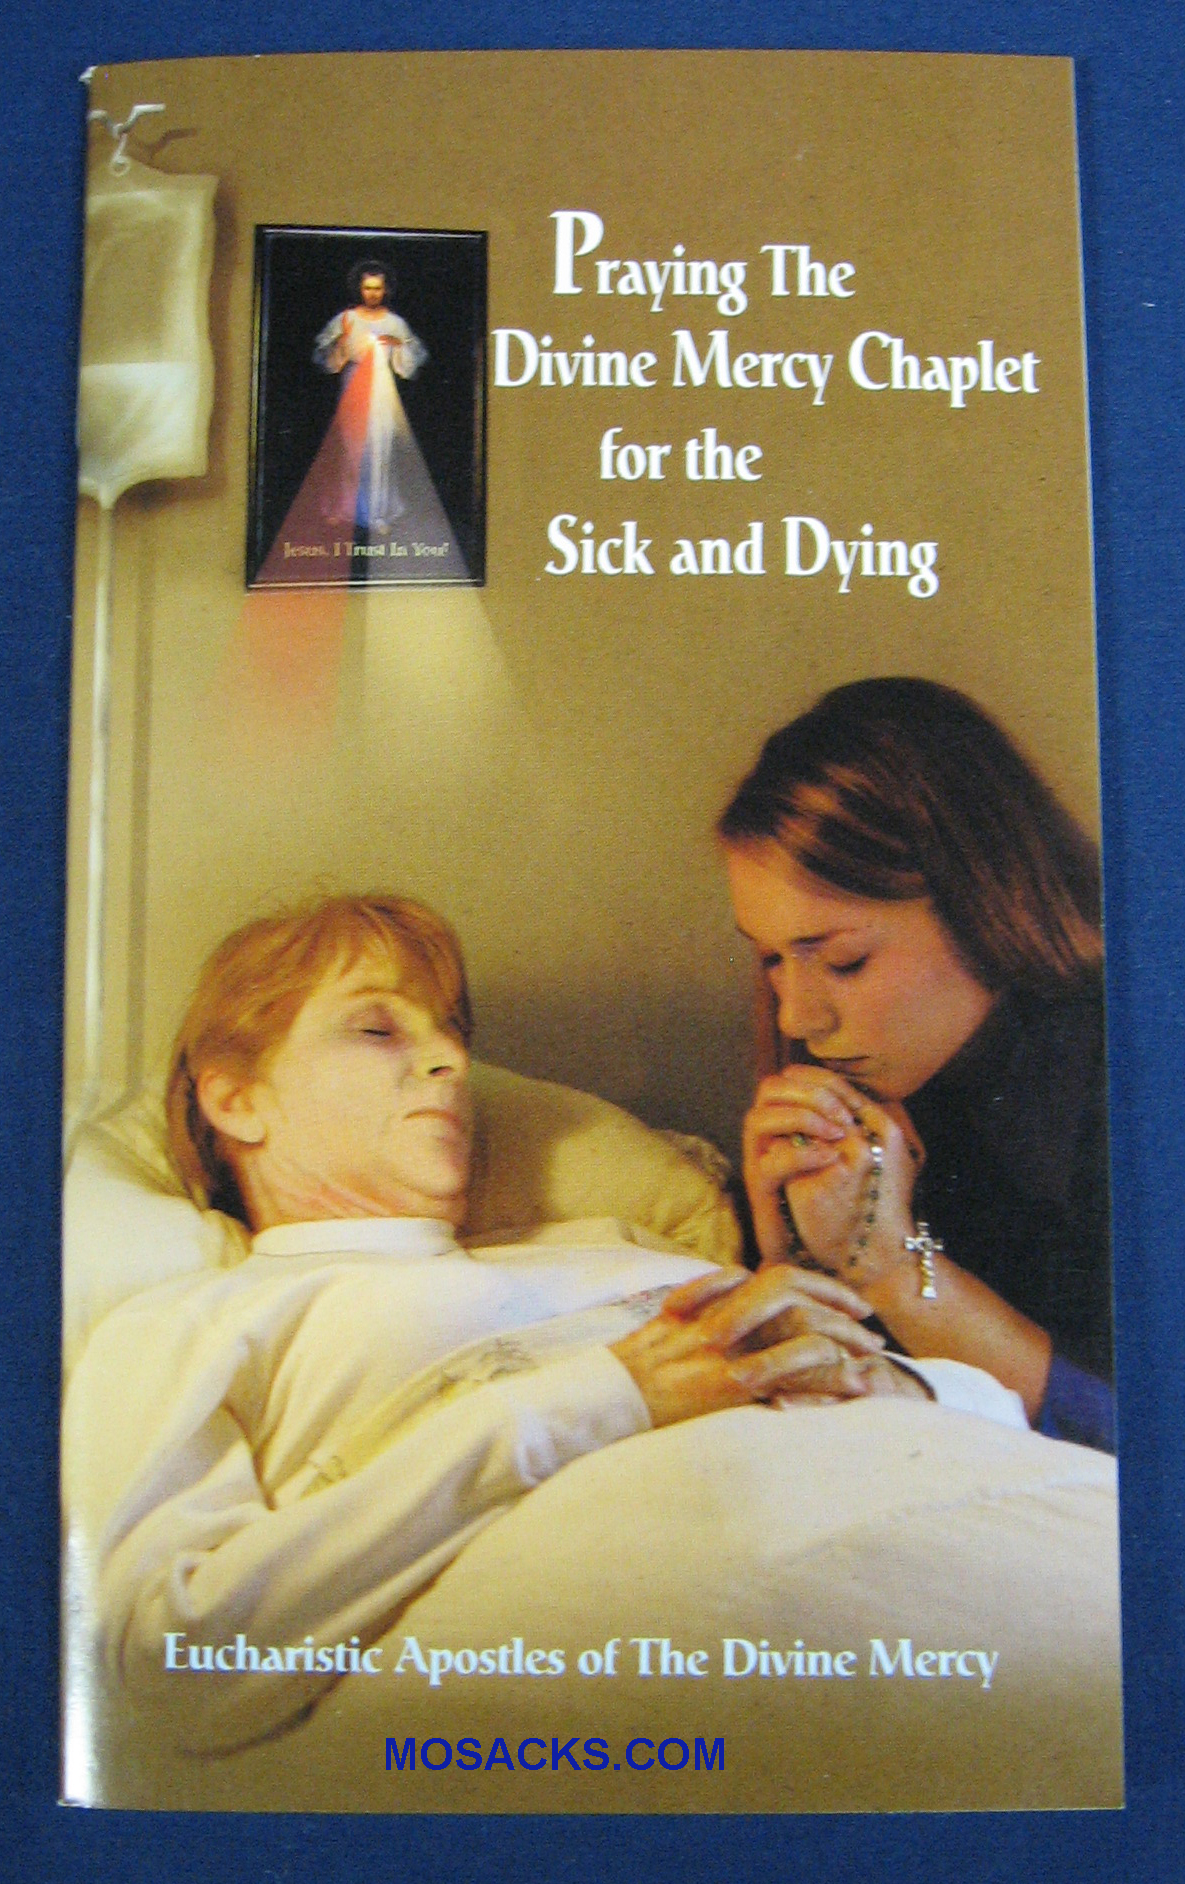 Praying The Divine Mercy Chaplet For The Sick And Dying-252-DMP